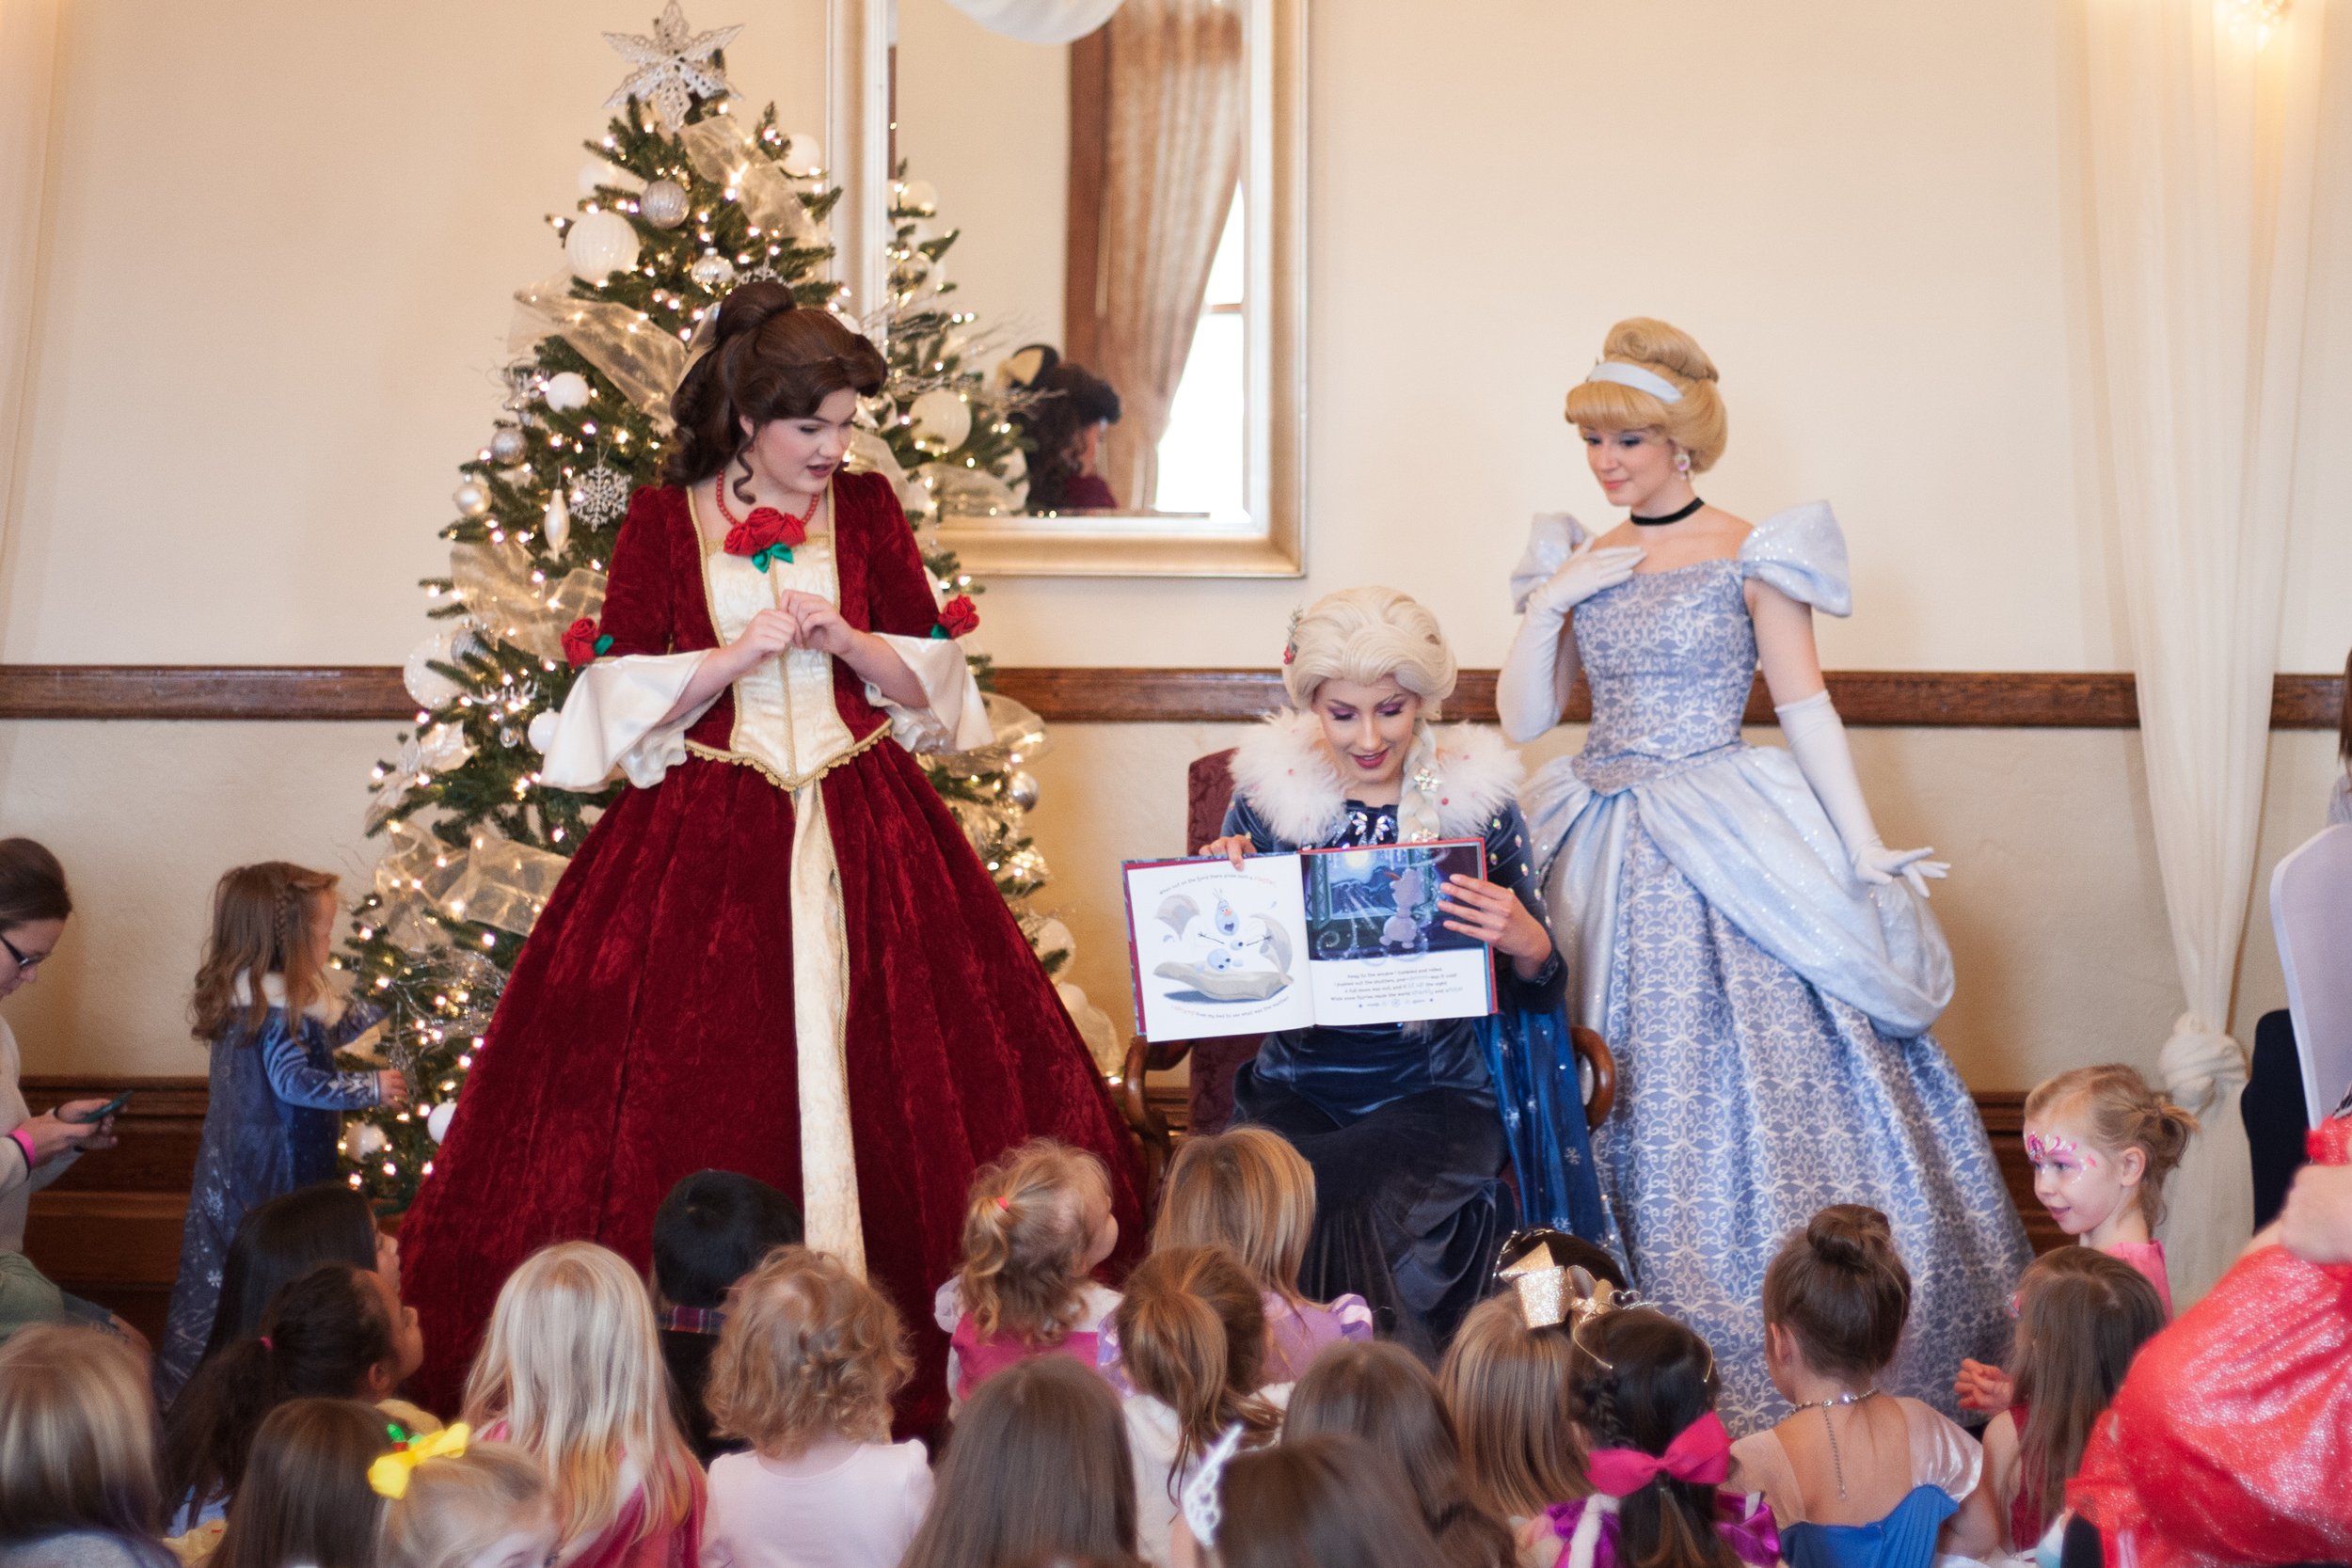 Royal Holiday Breakfast with Enchanted Experiences in Pittsburgh PA